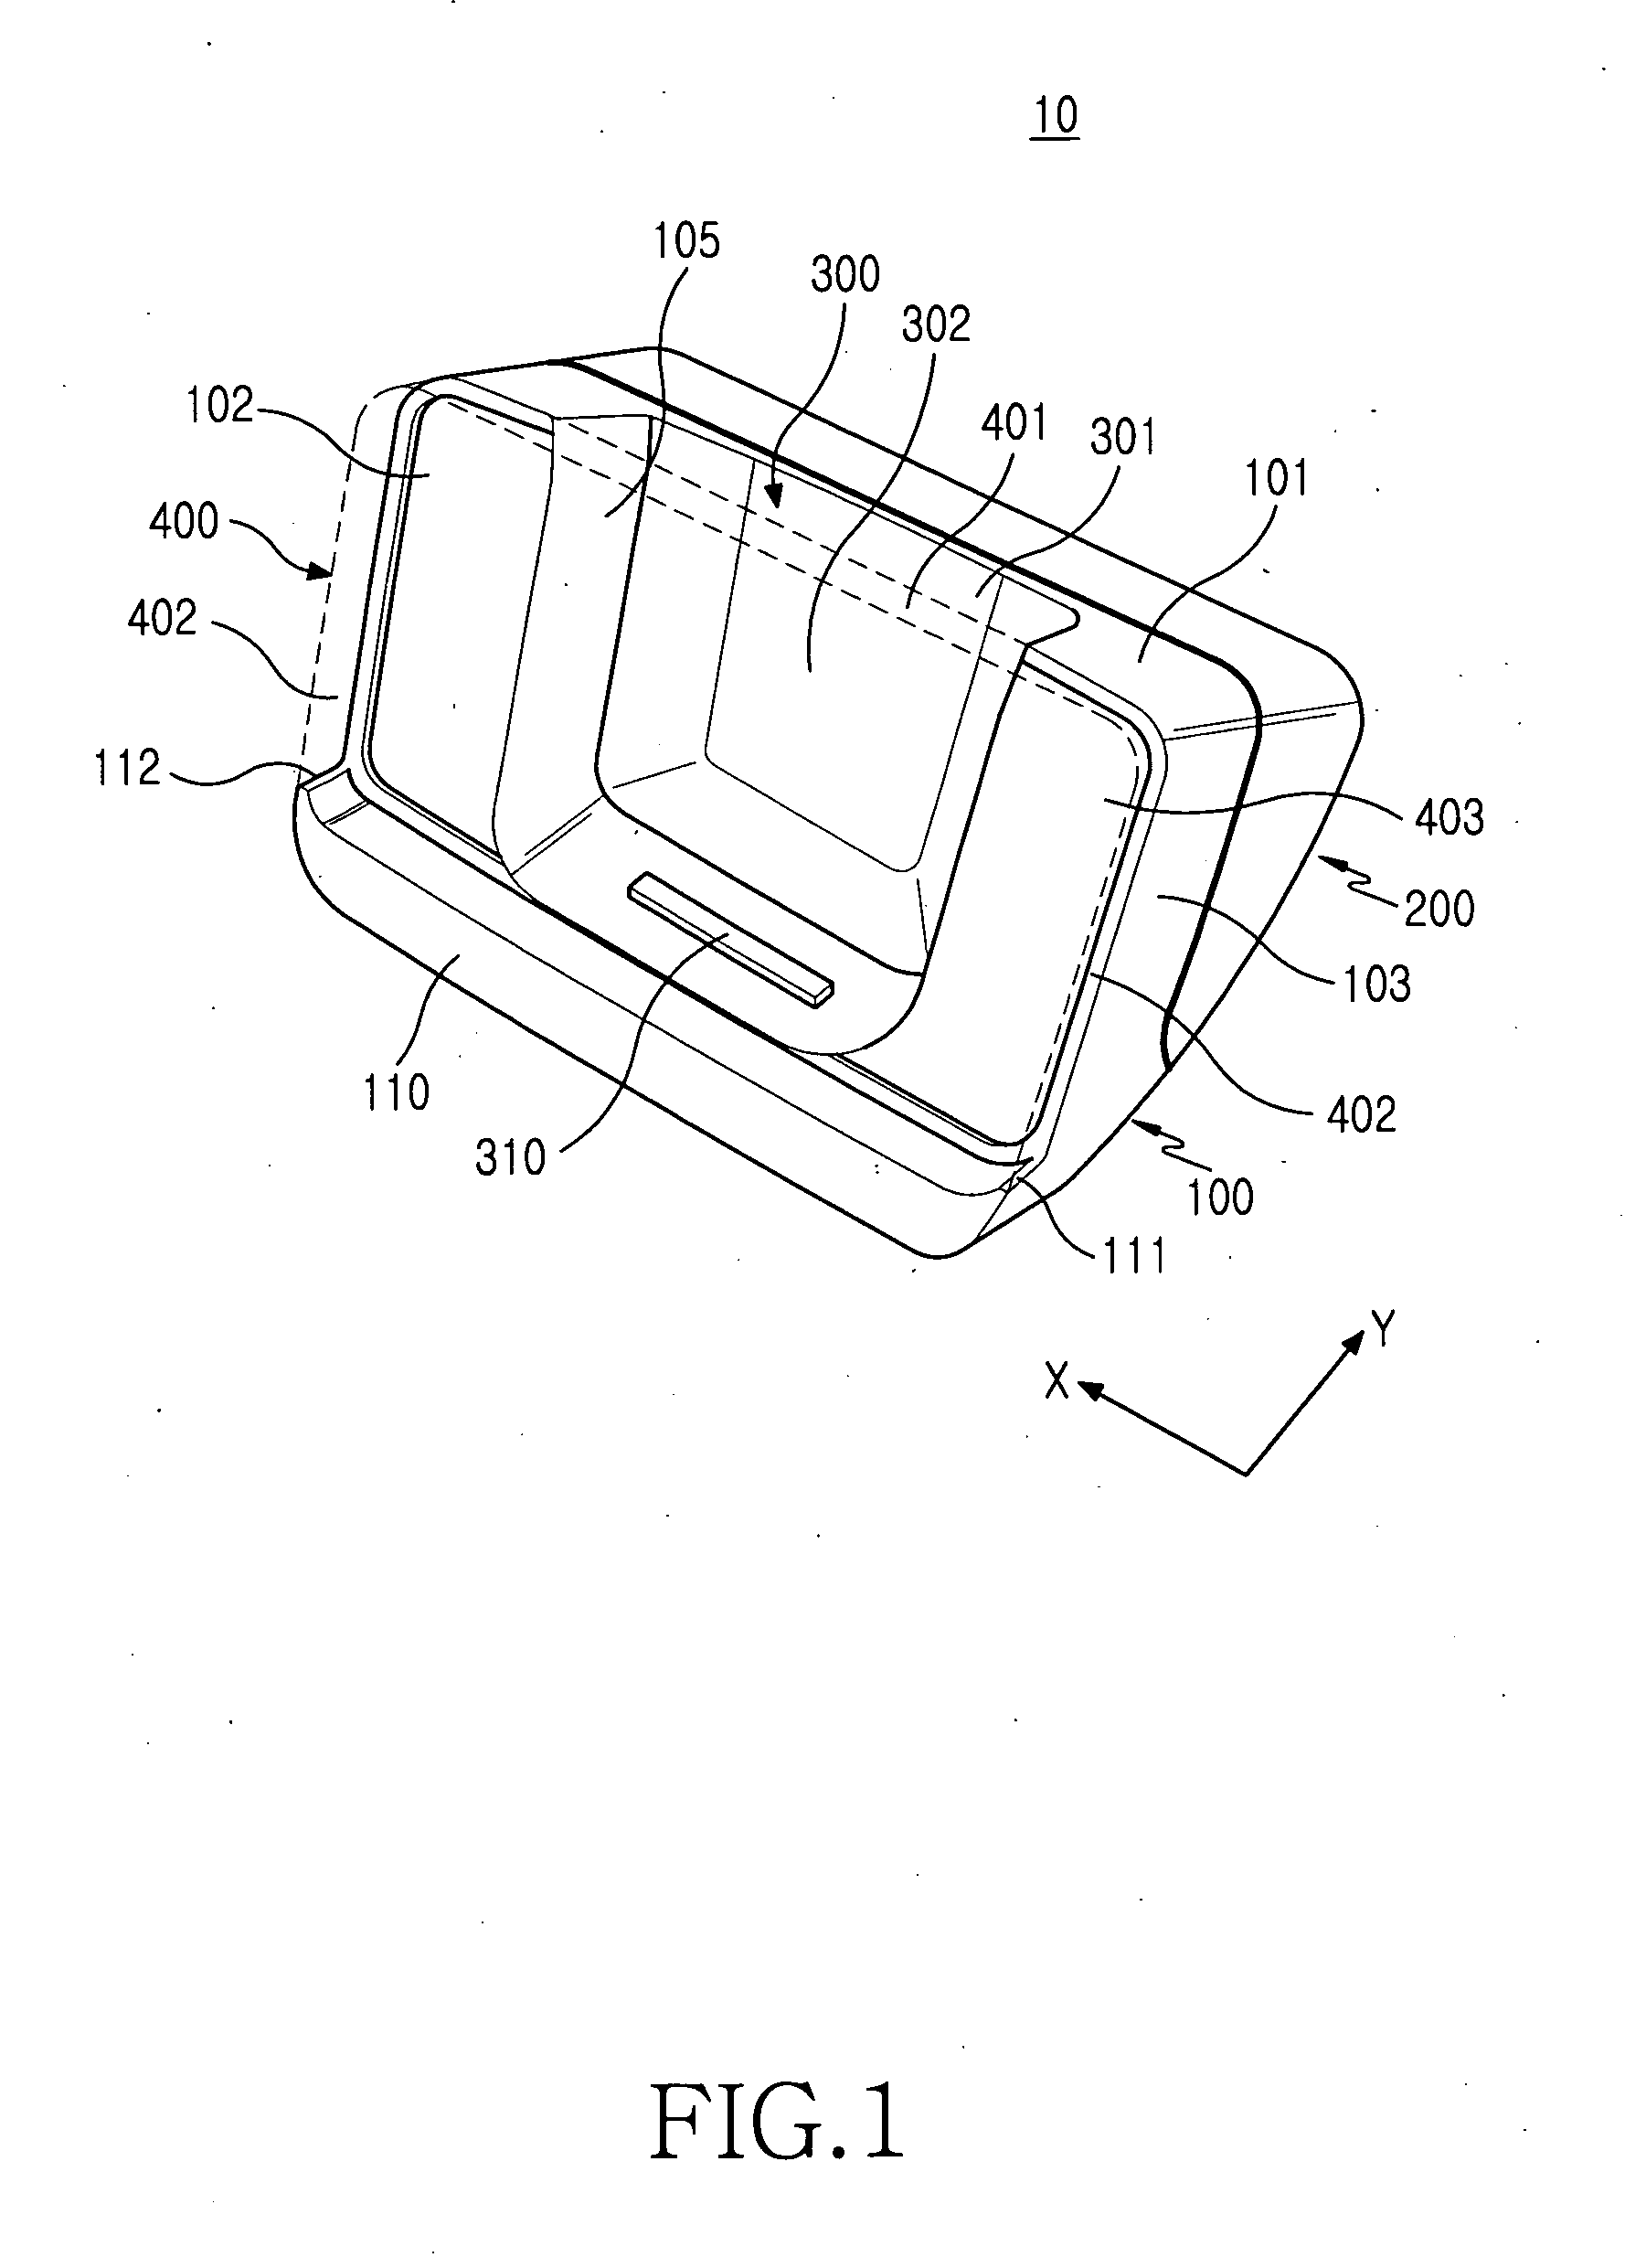 Charging cradle for seating portable device both horizontally and vertically